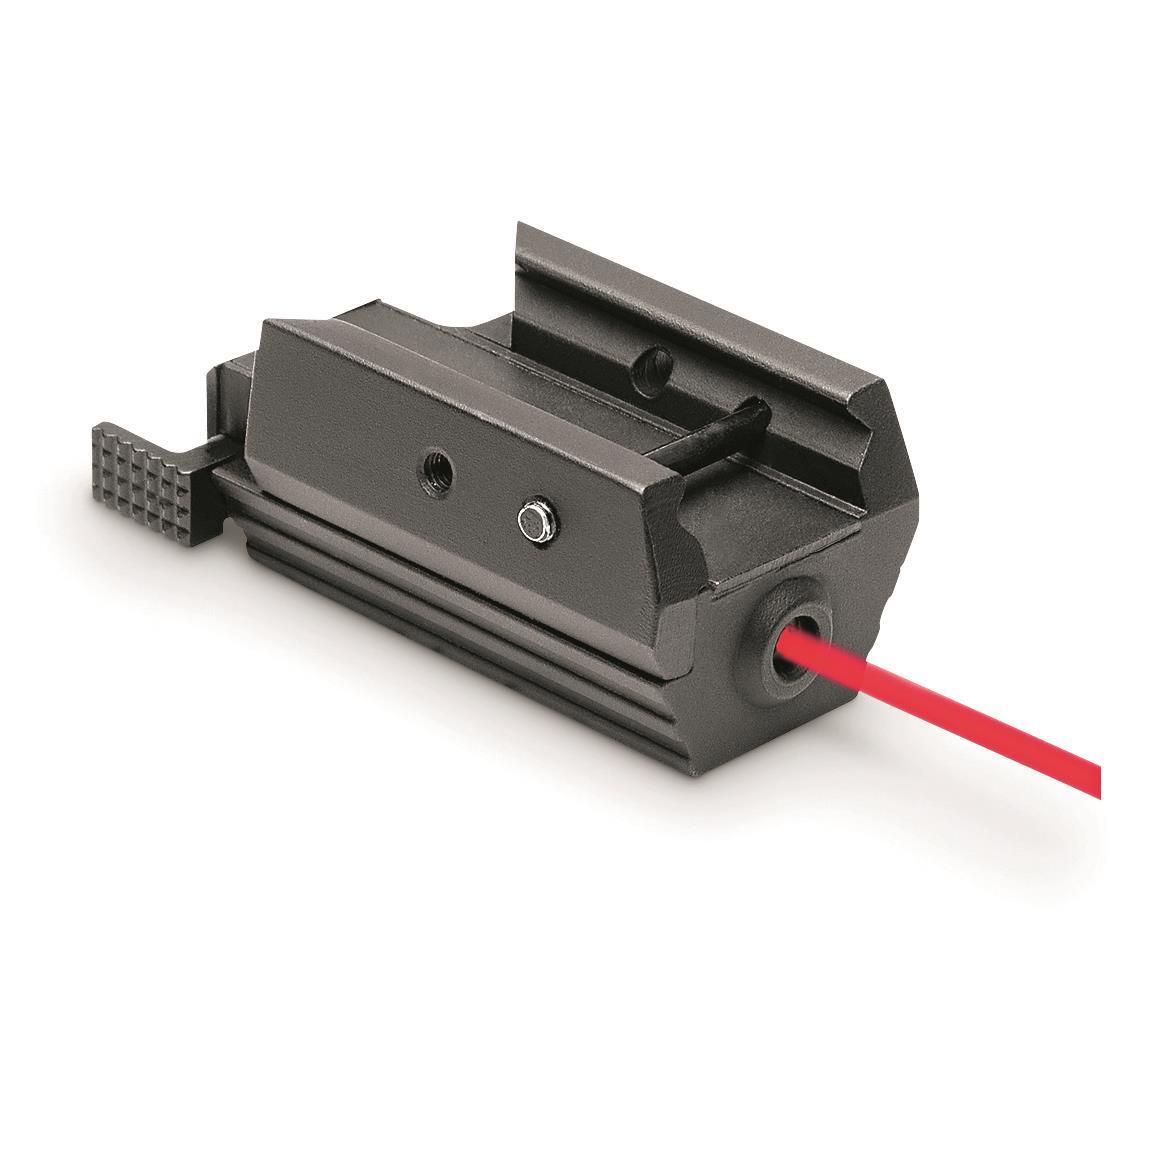 NEW NcStar Tactical Pistol Red Laser Weaver Style and Picatinny Type Rail Mounts